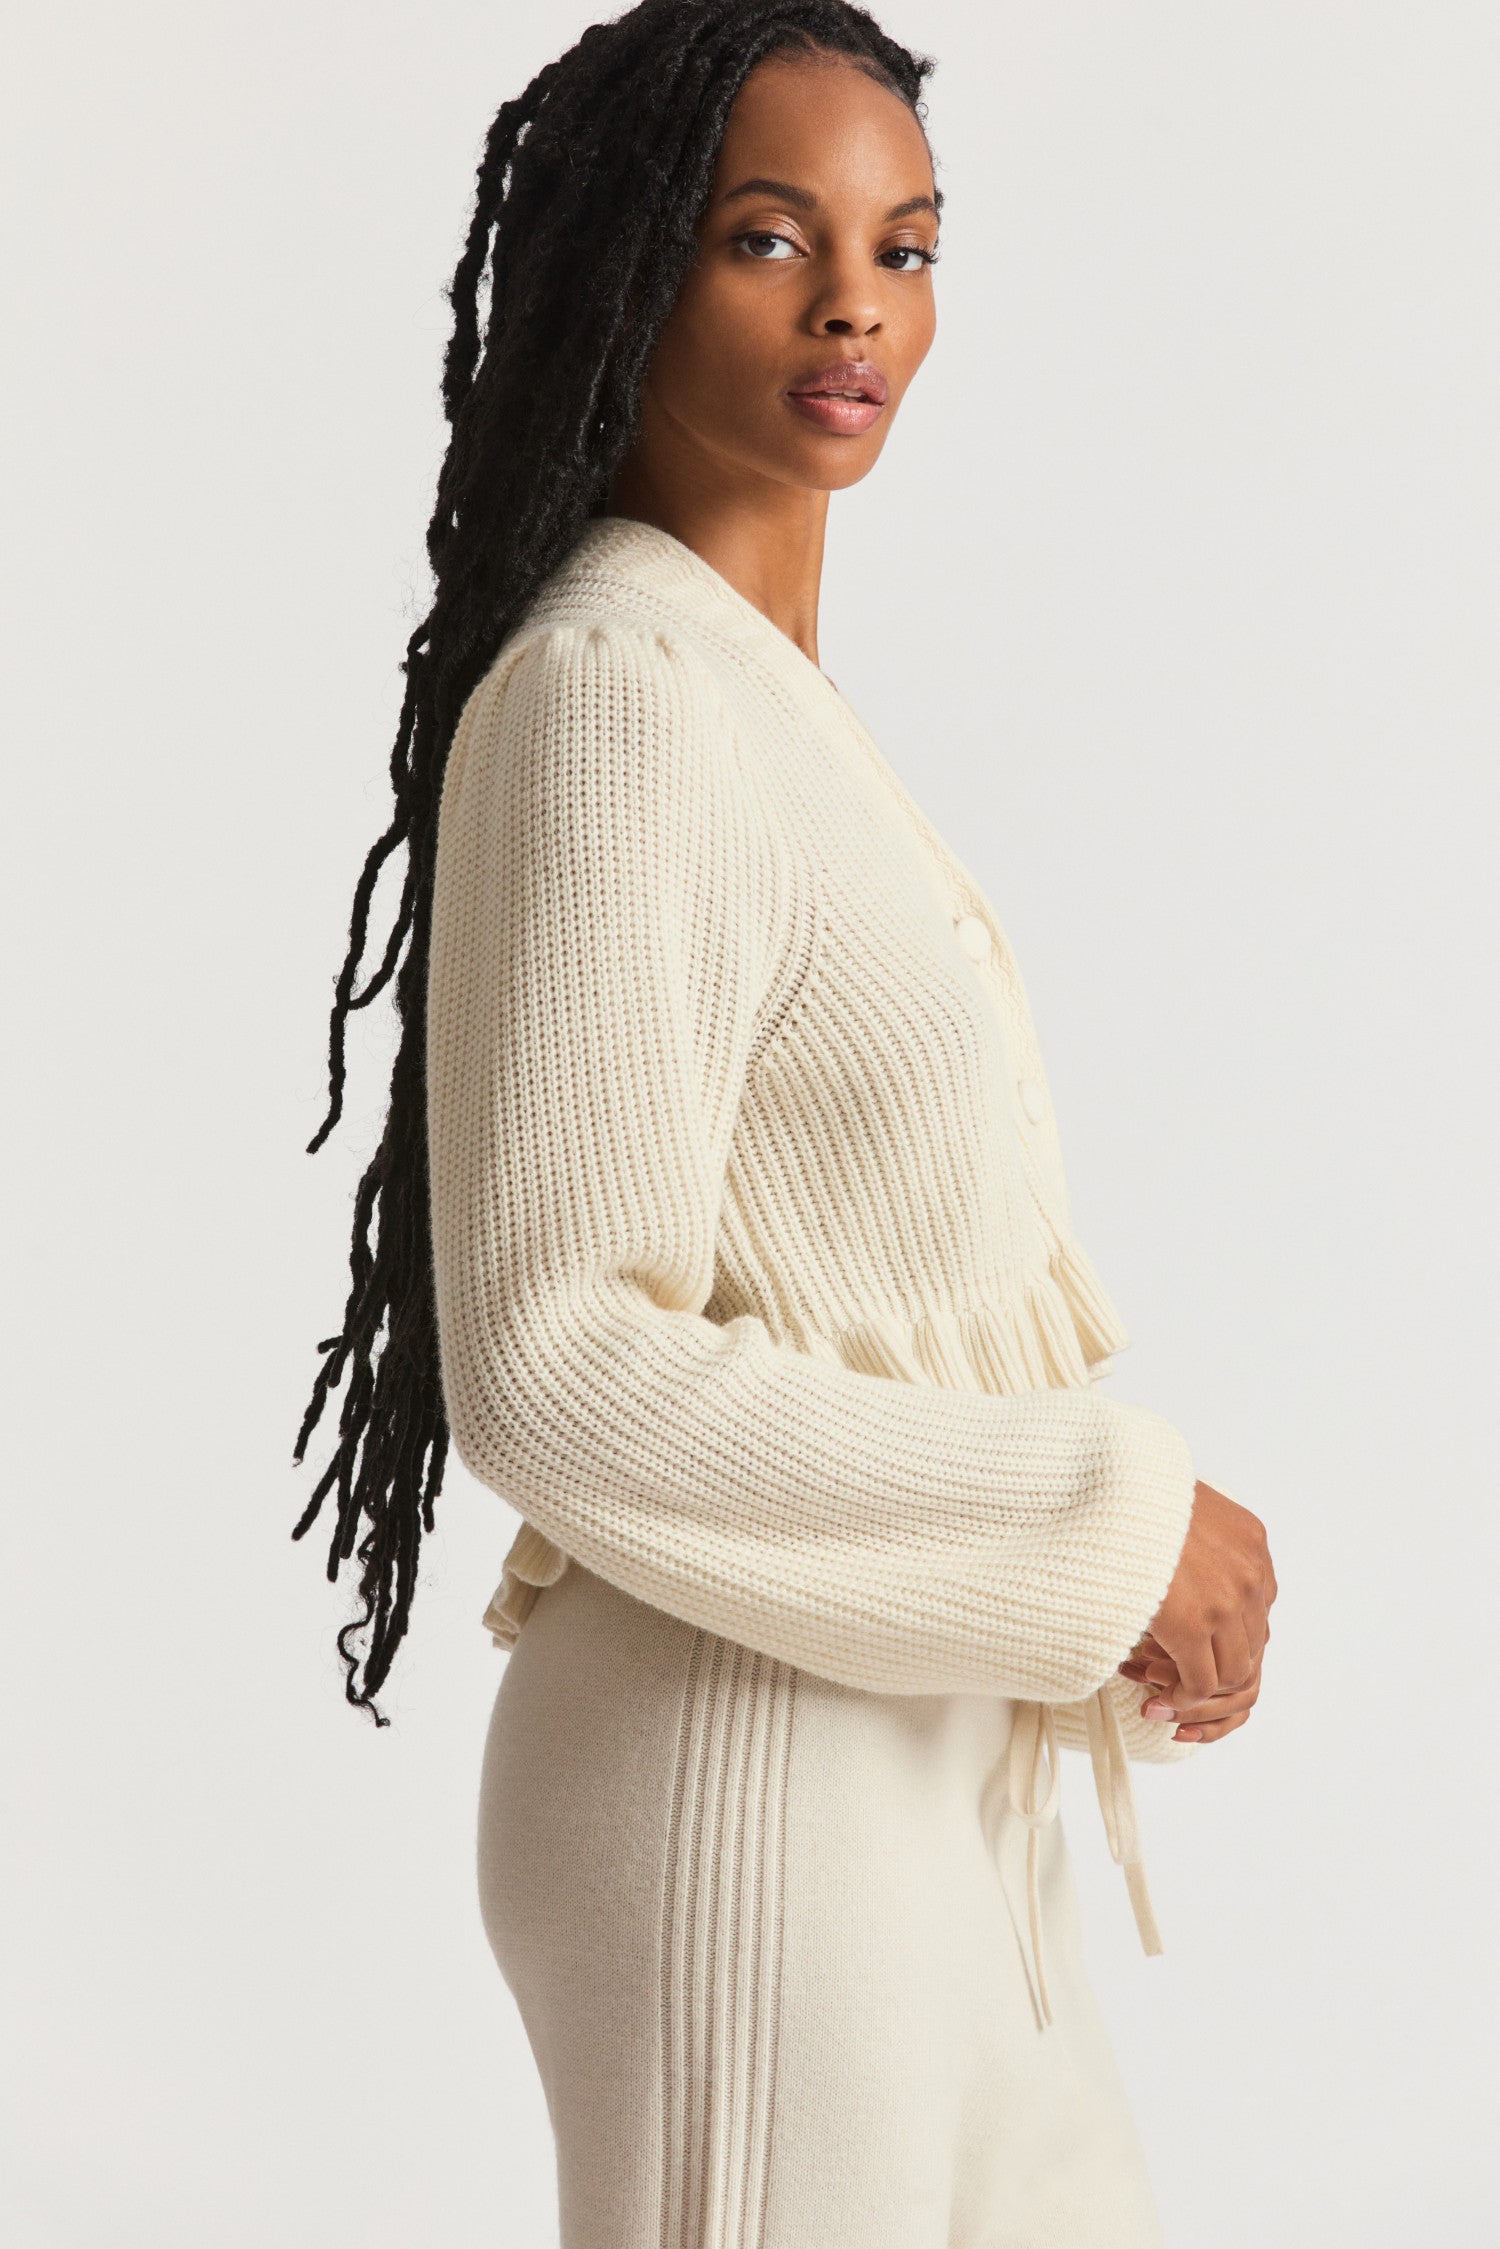 Cream cardigan in ultra-soft cashmere-wool blend with intricate ribbed knit techniques. With a v-neck that descends to three round buttons at the center front and pretty blouson sleeves. 